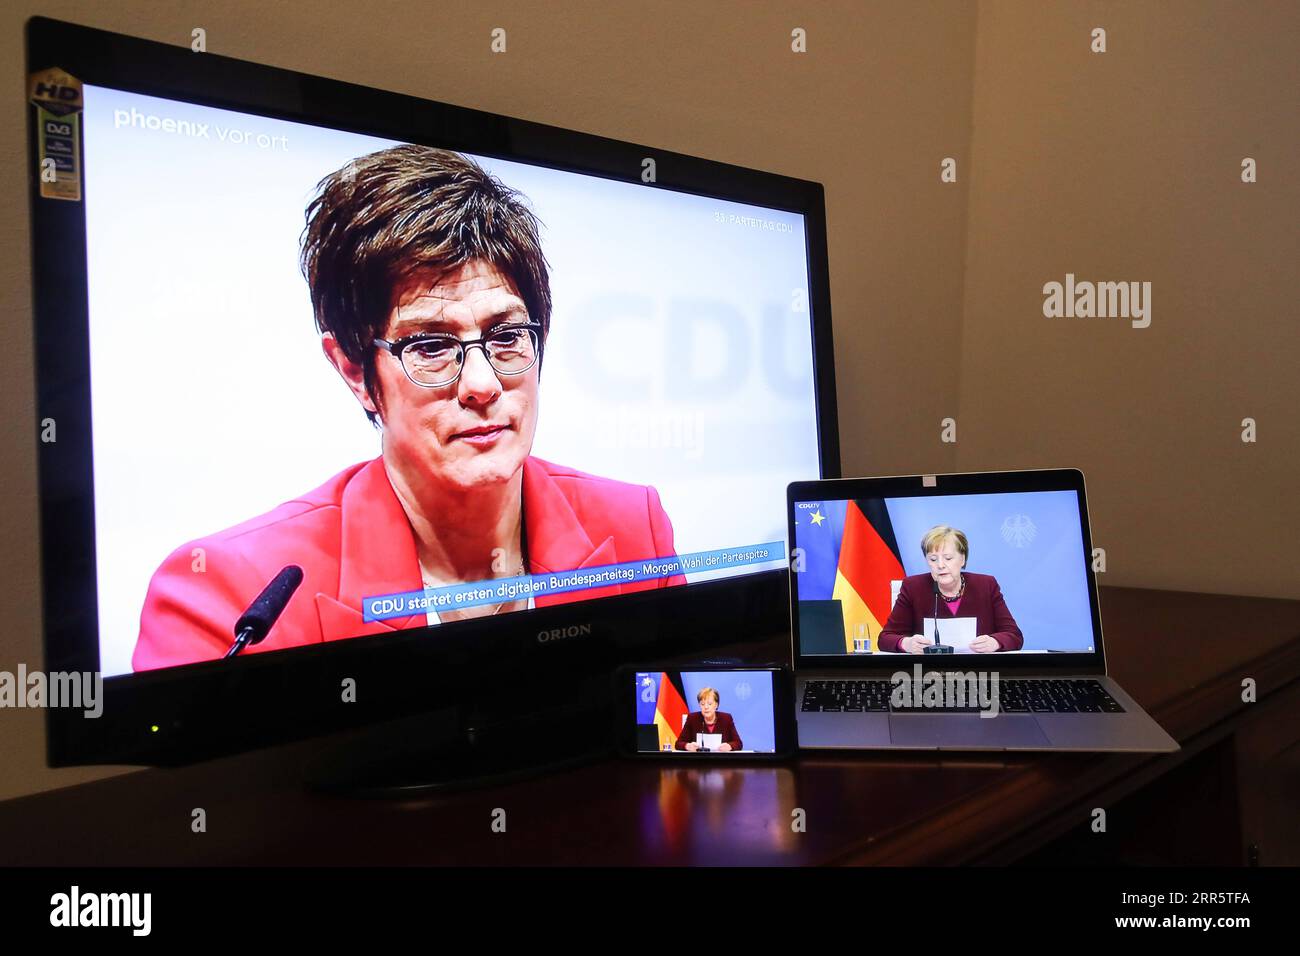 210115 -- BERLIN, Jan. 15, 2021 -- Photo taken in Berlin, Germany, on Jan. 15, 2021 shows the current leader of Germany s governing party Christian Democratic Union CDU Annegret Kramp-Karrenbauer L and German Chancellor Angela Merkel attending the CDU s digital party conference. The CDU began its digital party conference on Friday with a key agenda to elect a new party leader, which is widely seen as the first step towards selecting Chancellor Angela Merkel s successor.  GERMANY-BERLIN-CDU-DIGITAL PARTY CONFERENCE ShanxYuqi PUBLICATIONxNOTxINxCHN Stock Photo